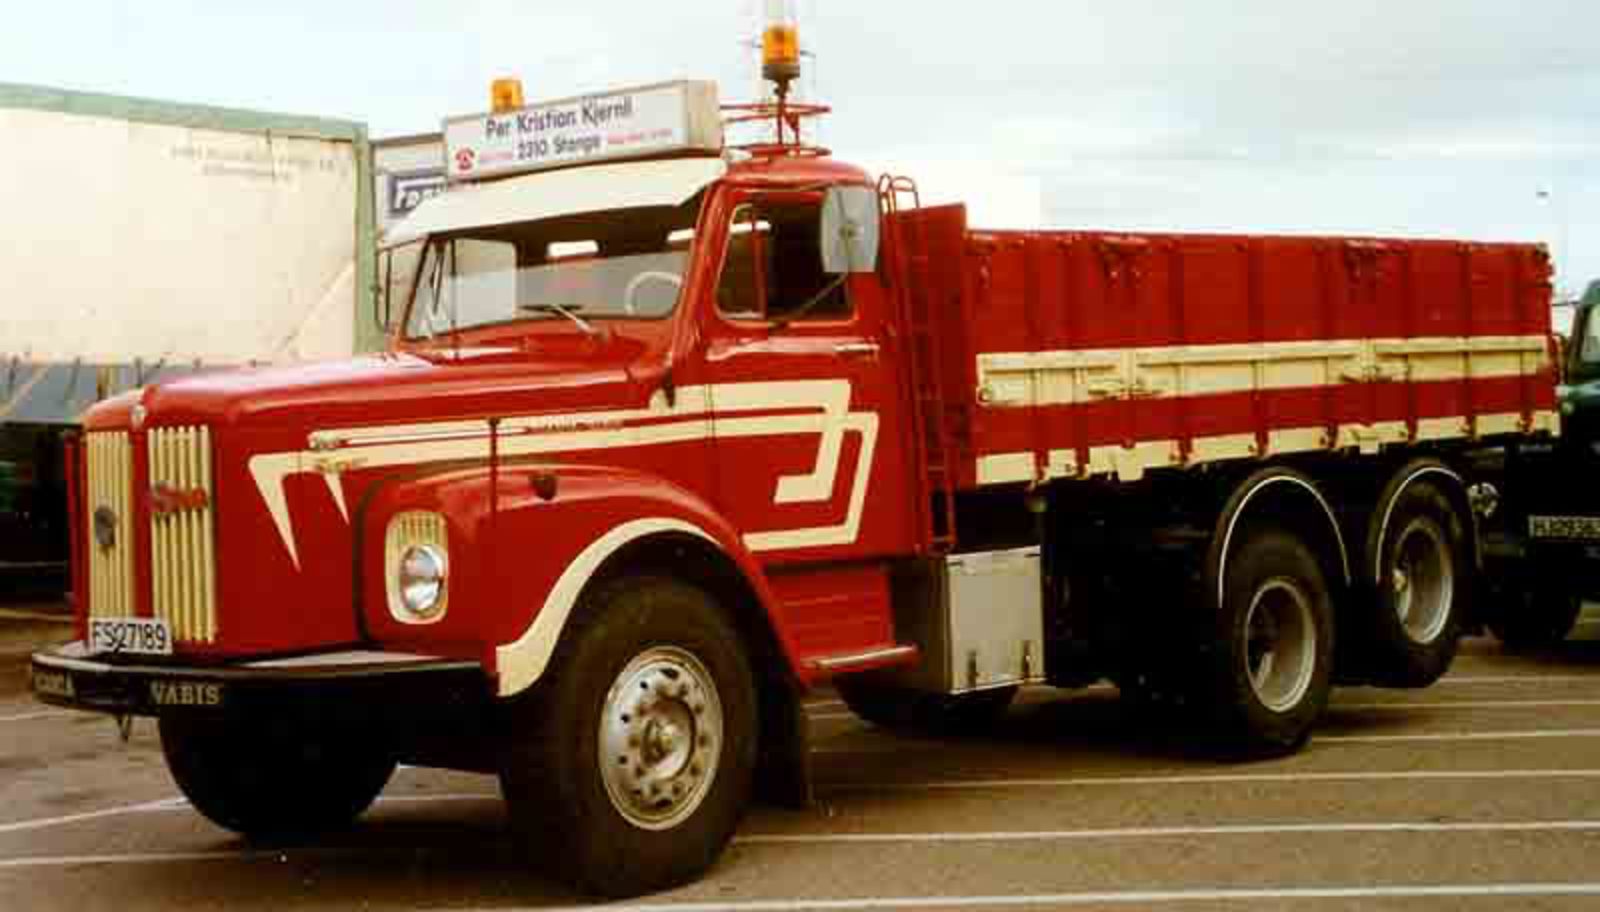 Scania-Vabis LS765 Photo Gallery: Photo #03 out of 3, Image Size ...